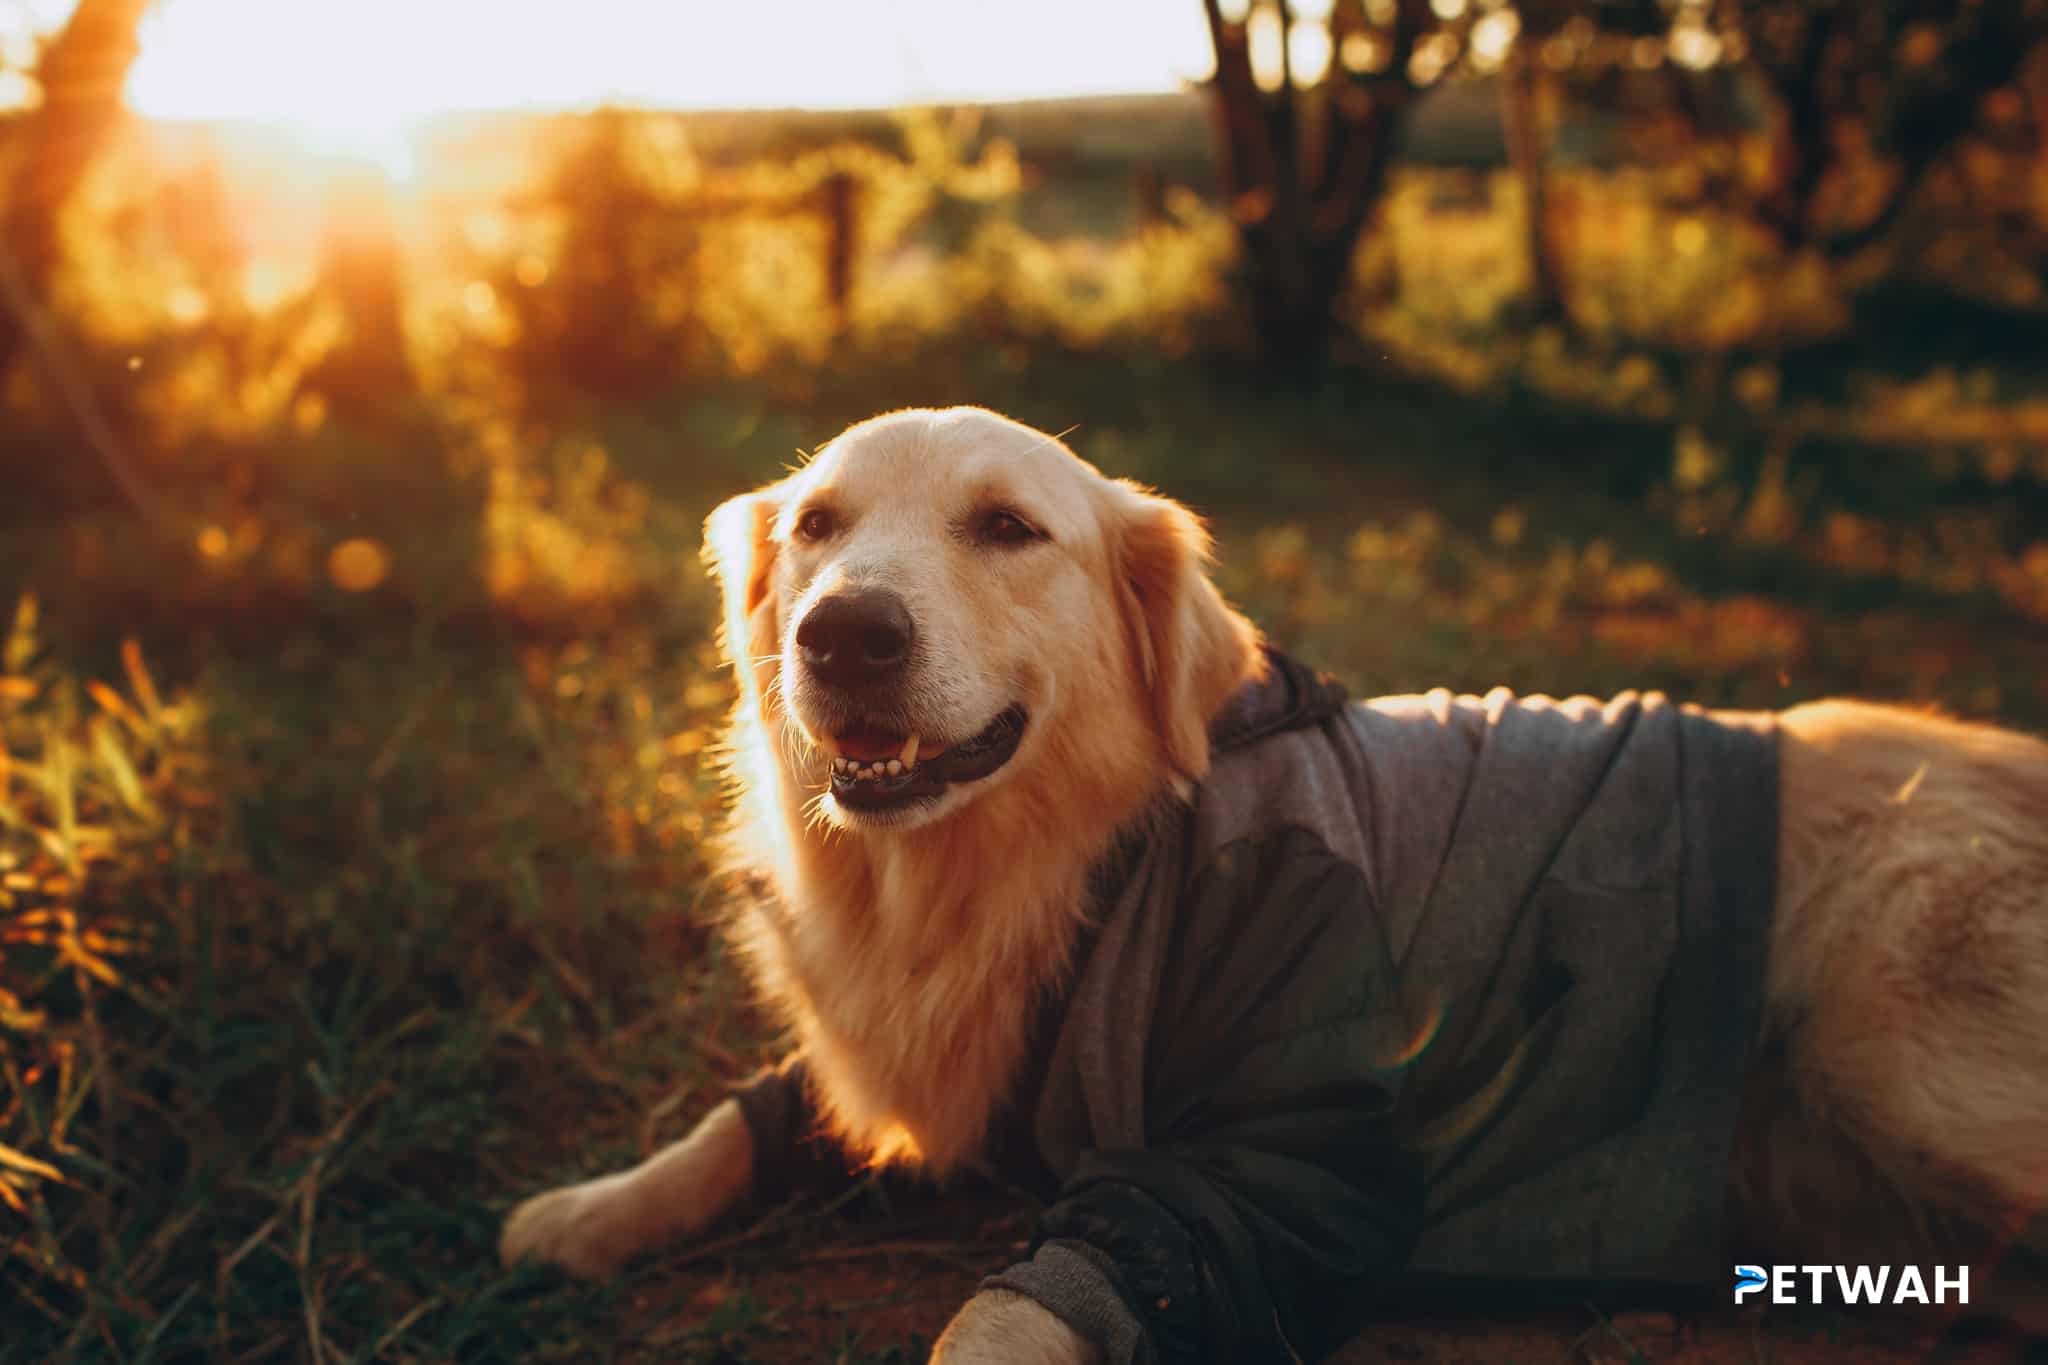 Teaching Basic Commands to a Golden Retriever: Sit, Stay, and Come